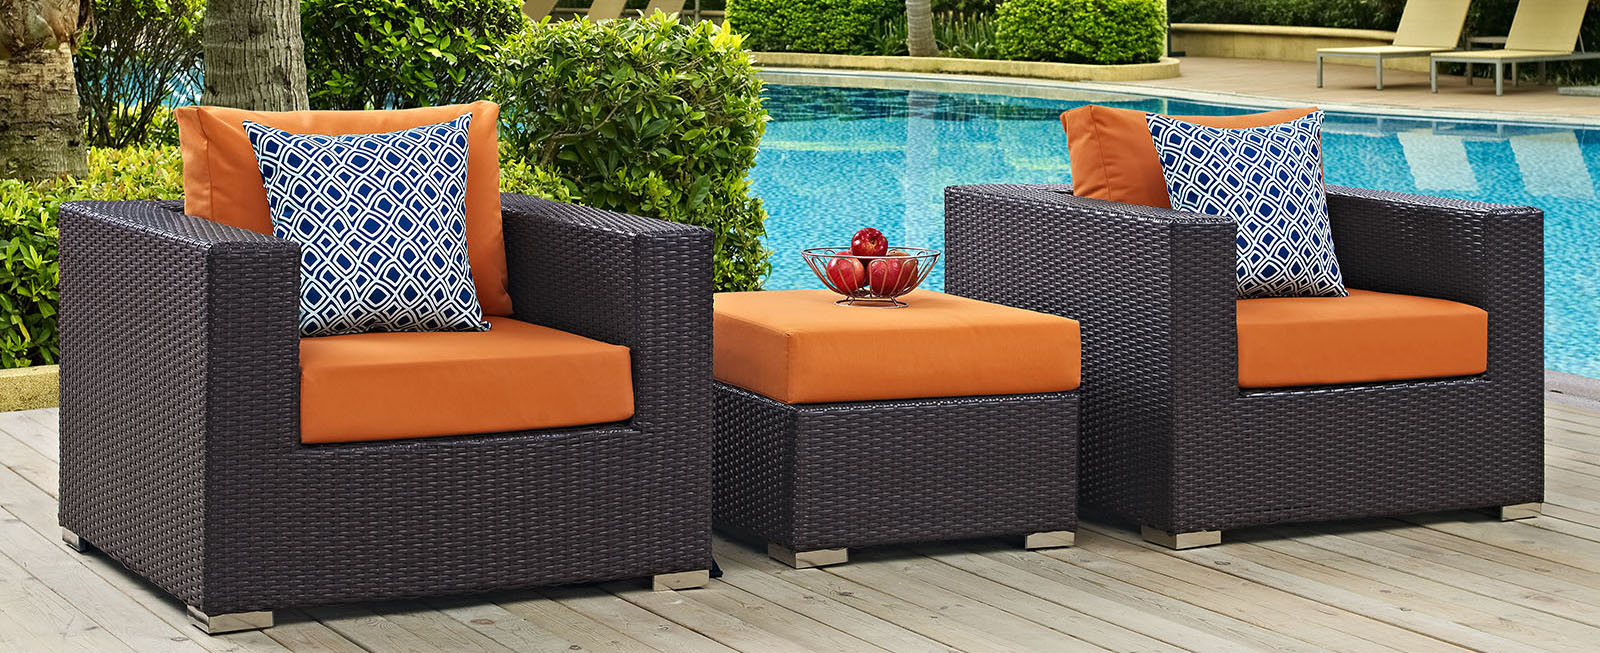 Save on Homethreads Outdoor Furniture